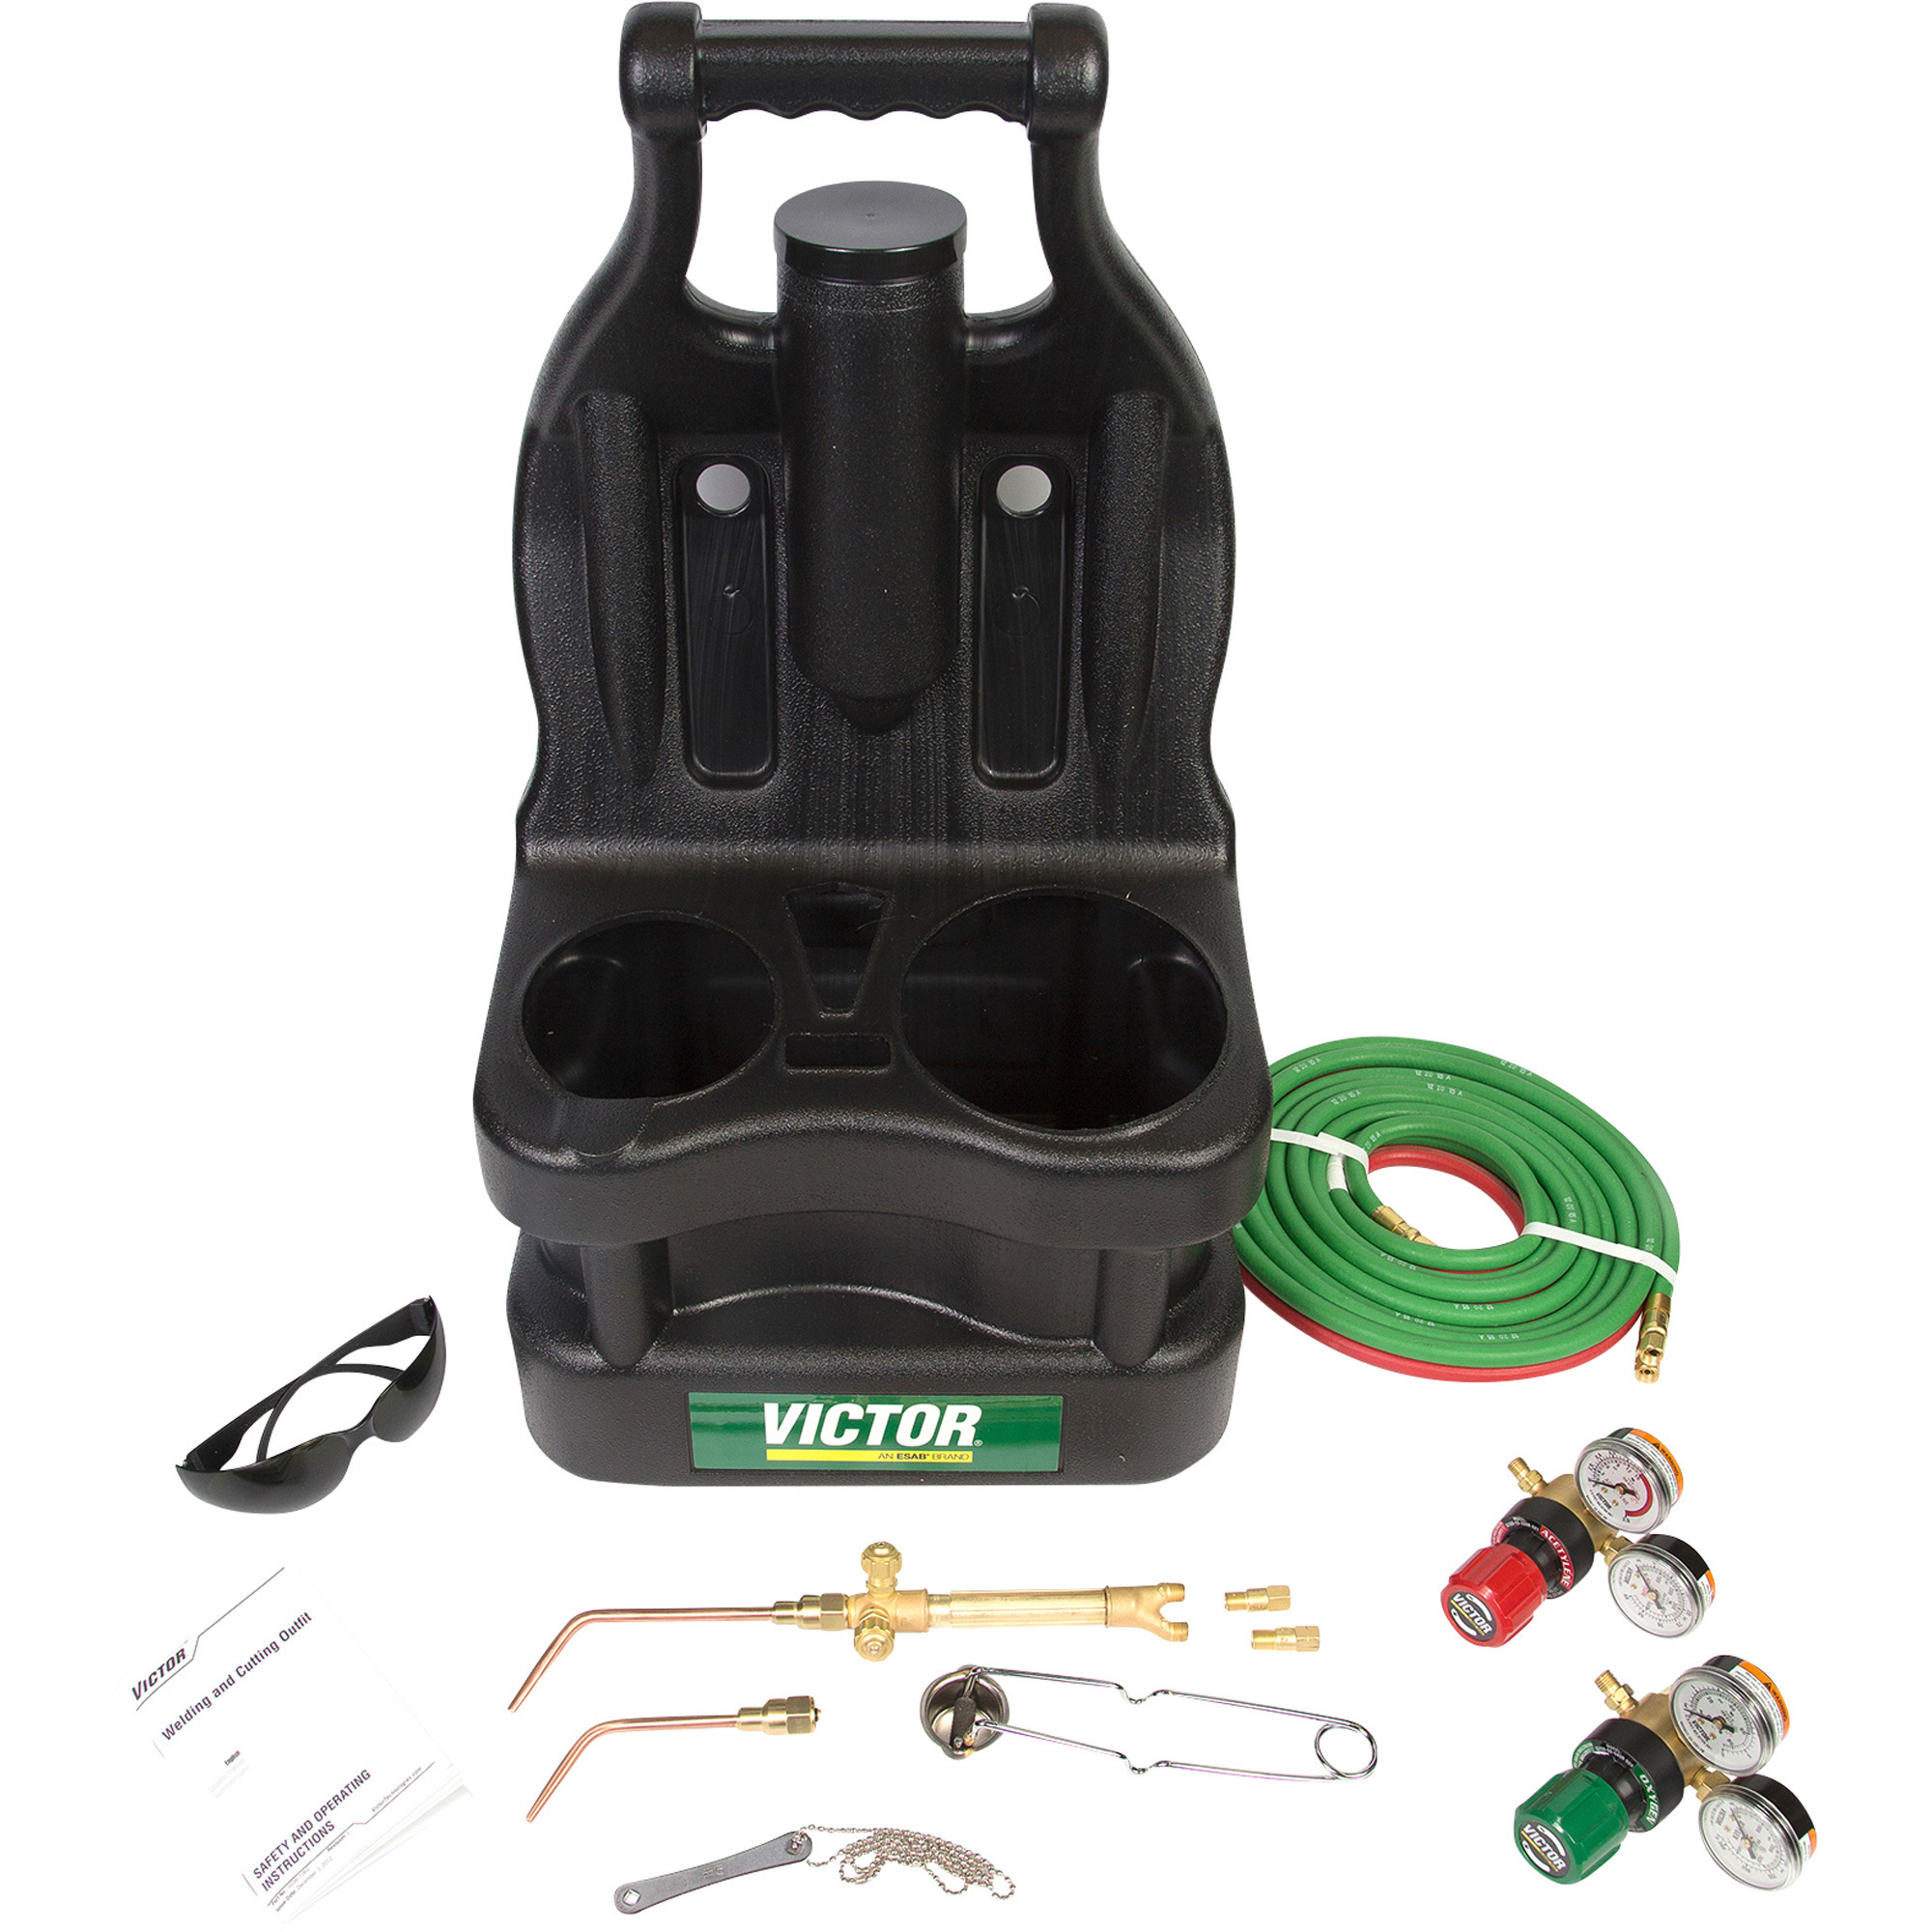 Victor G150 Series Portable Welding Tote â Model 0384-0945